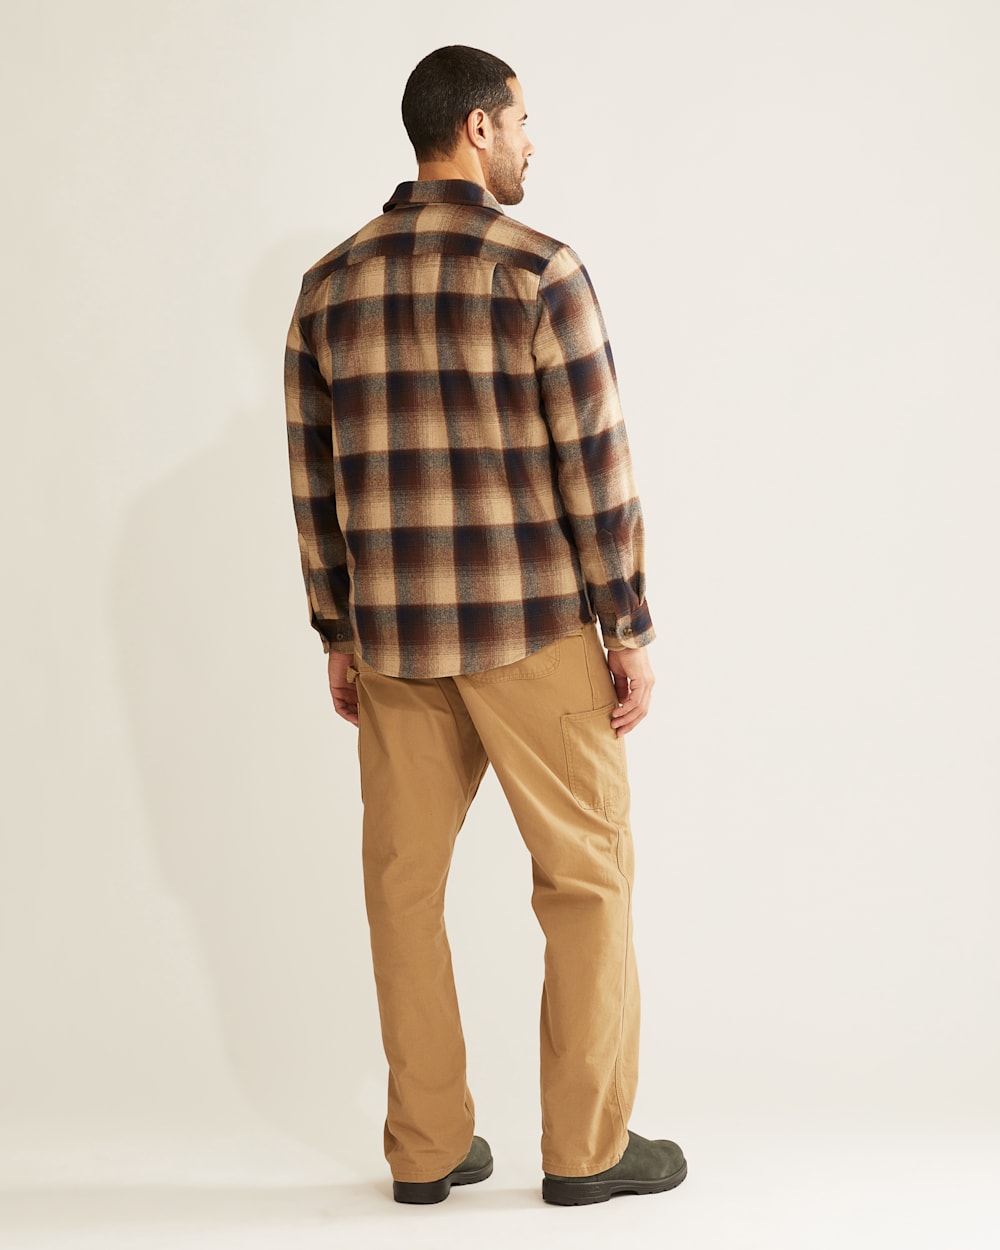 ALTERNATE VIEW OF MEN'S PLAID LODGE SHIRT IN BROWN/NAVY OMBRE image number 3